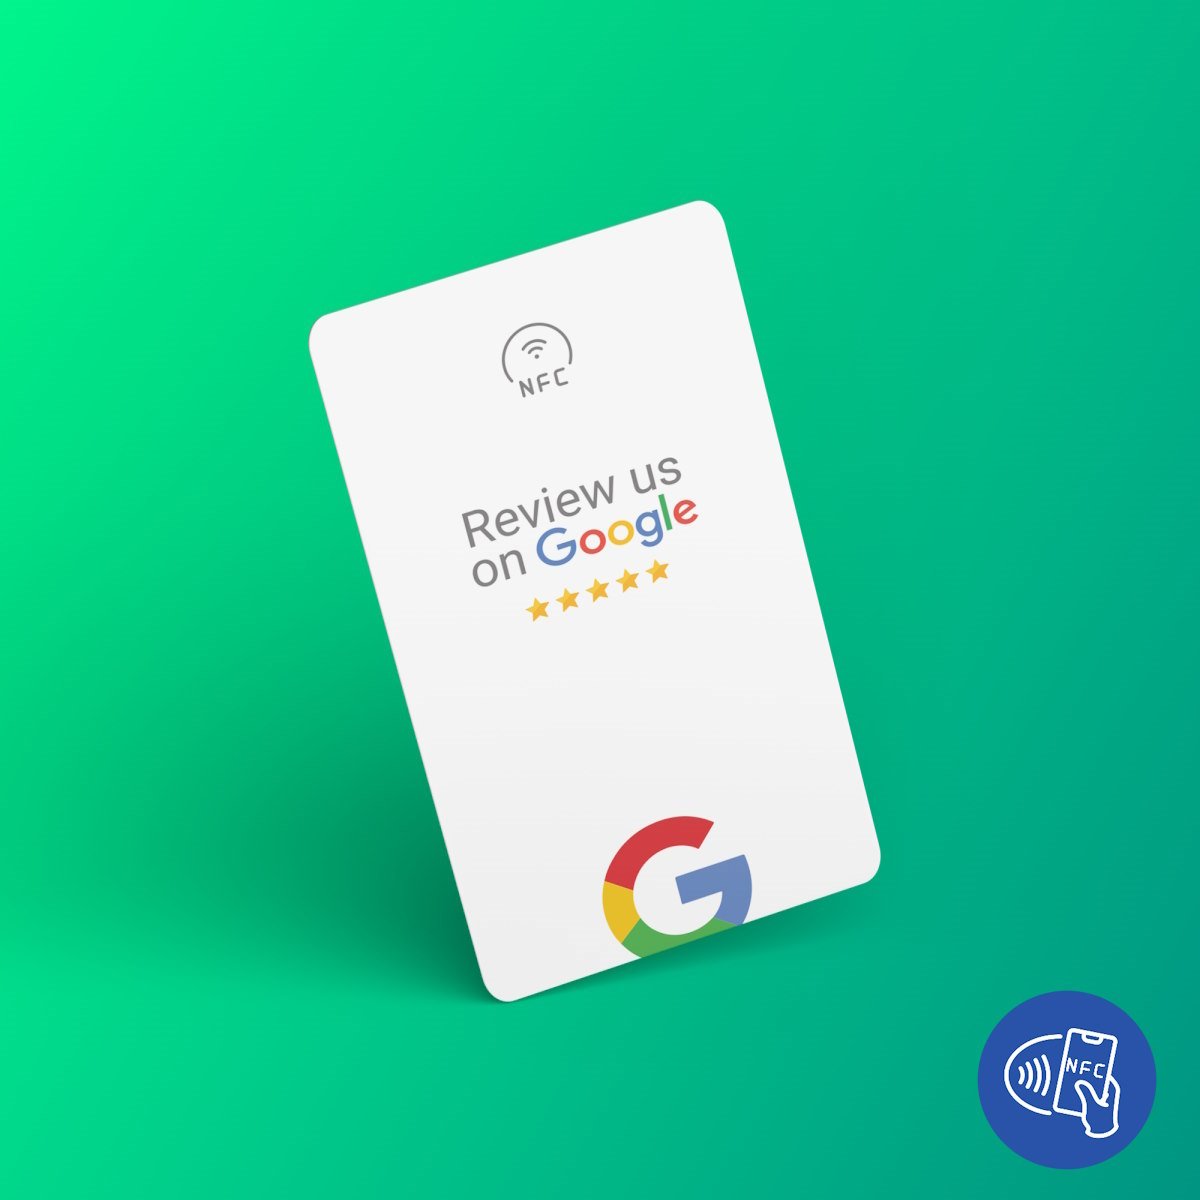 Google Review NFC Card “Tap” with Google Review QR Code – Virtual Card